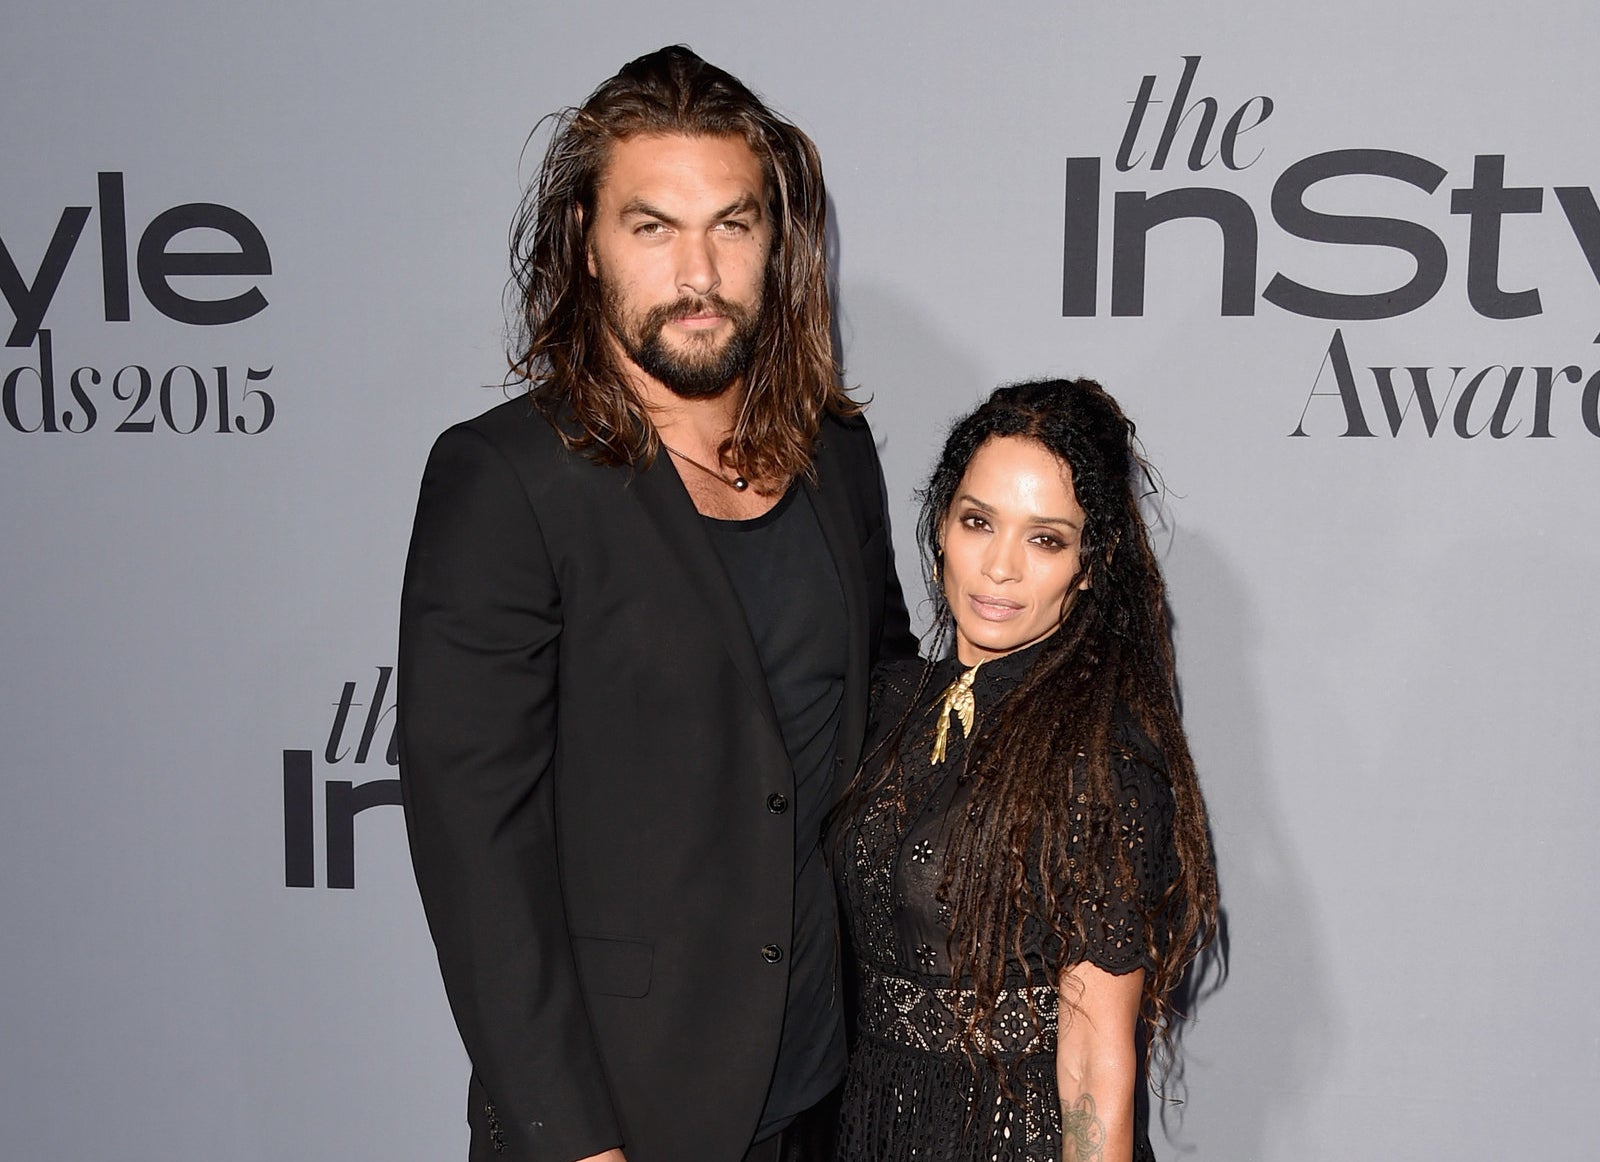 Jason Momoa Has Been Madly In Love With His Wife Lisa Bonet Since He Was 8 Years Old1600 x 1162